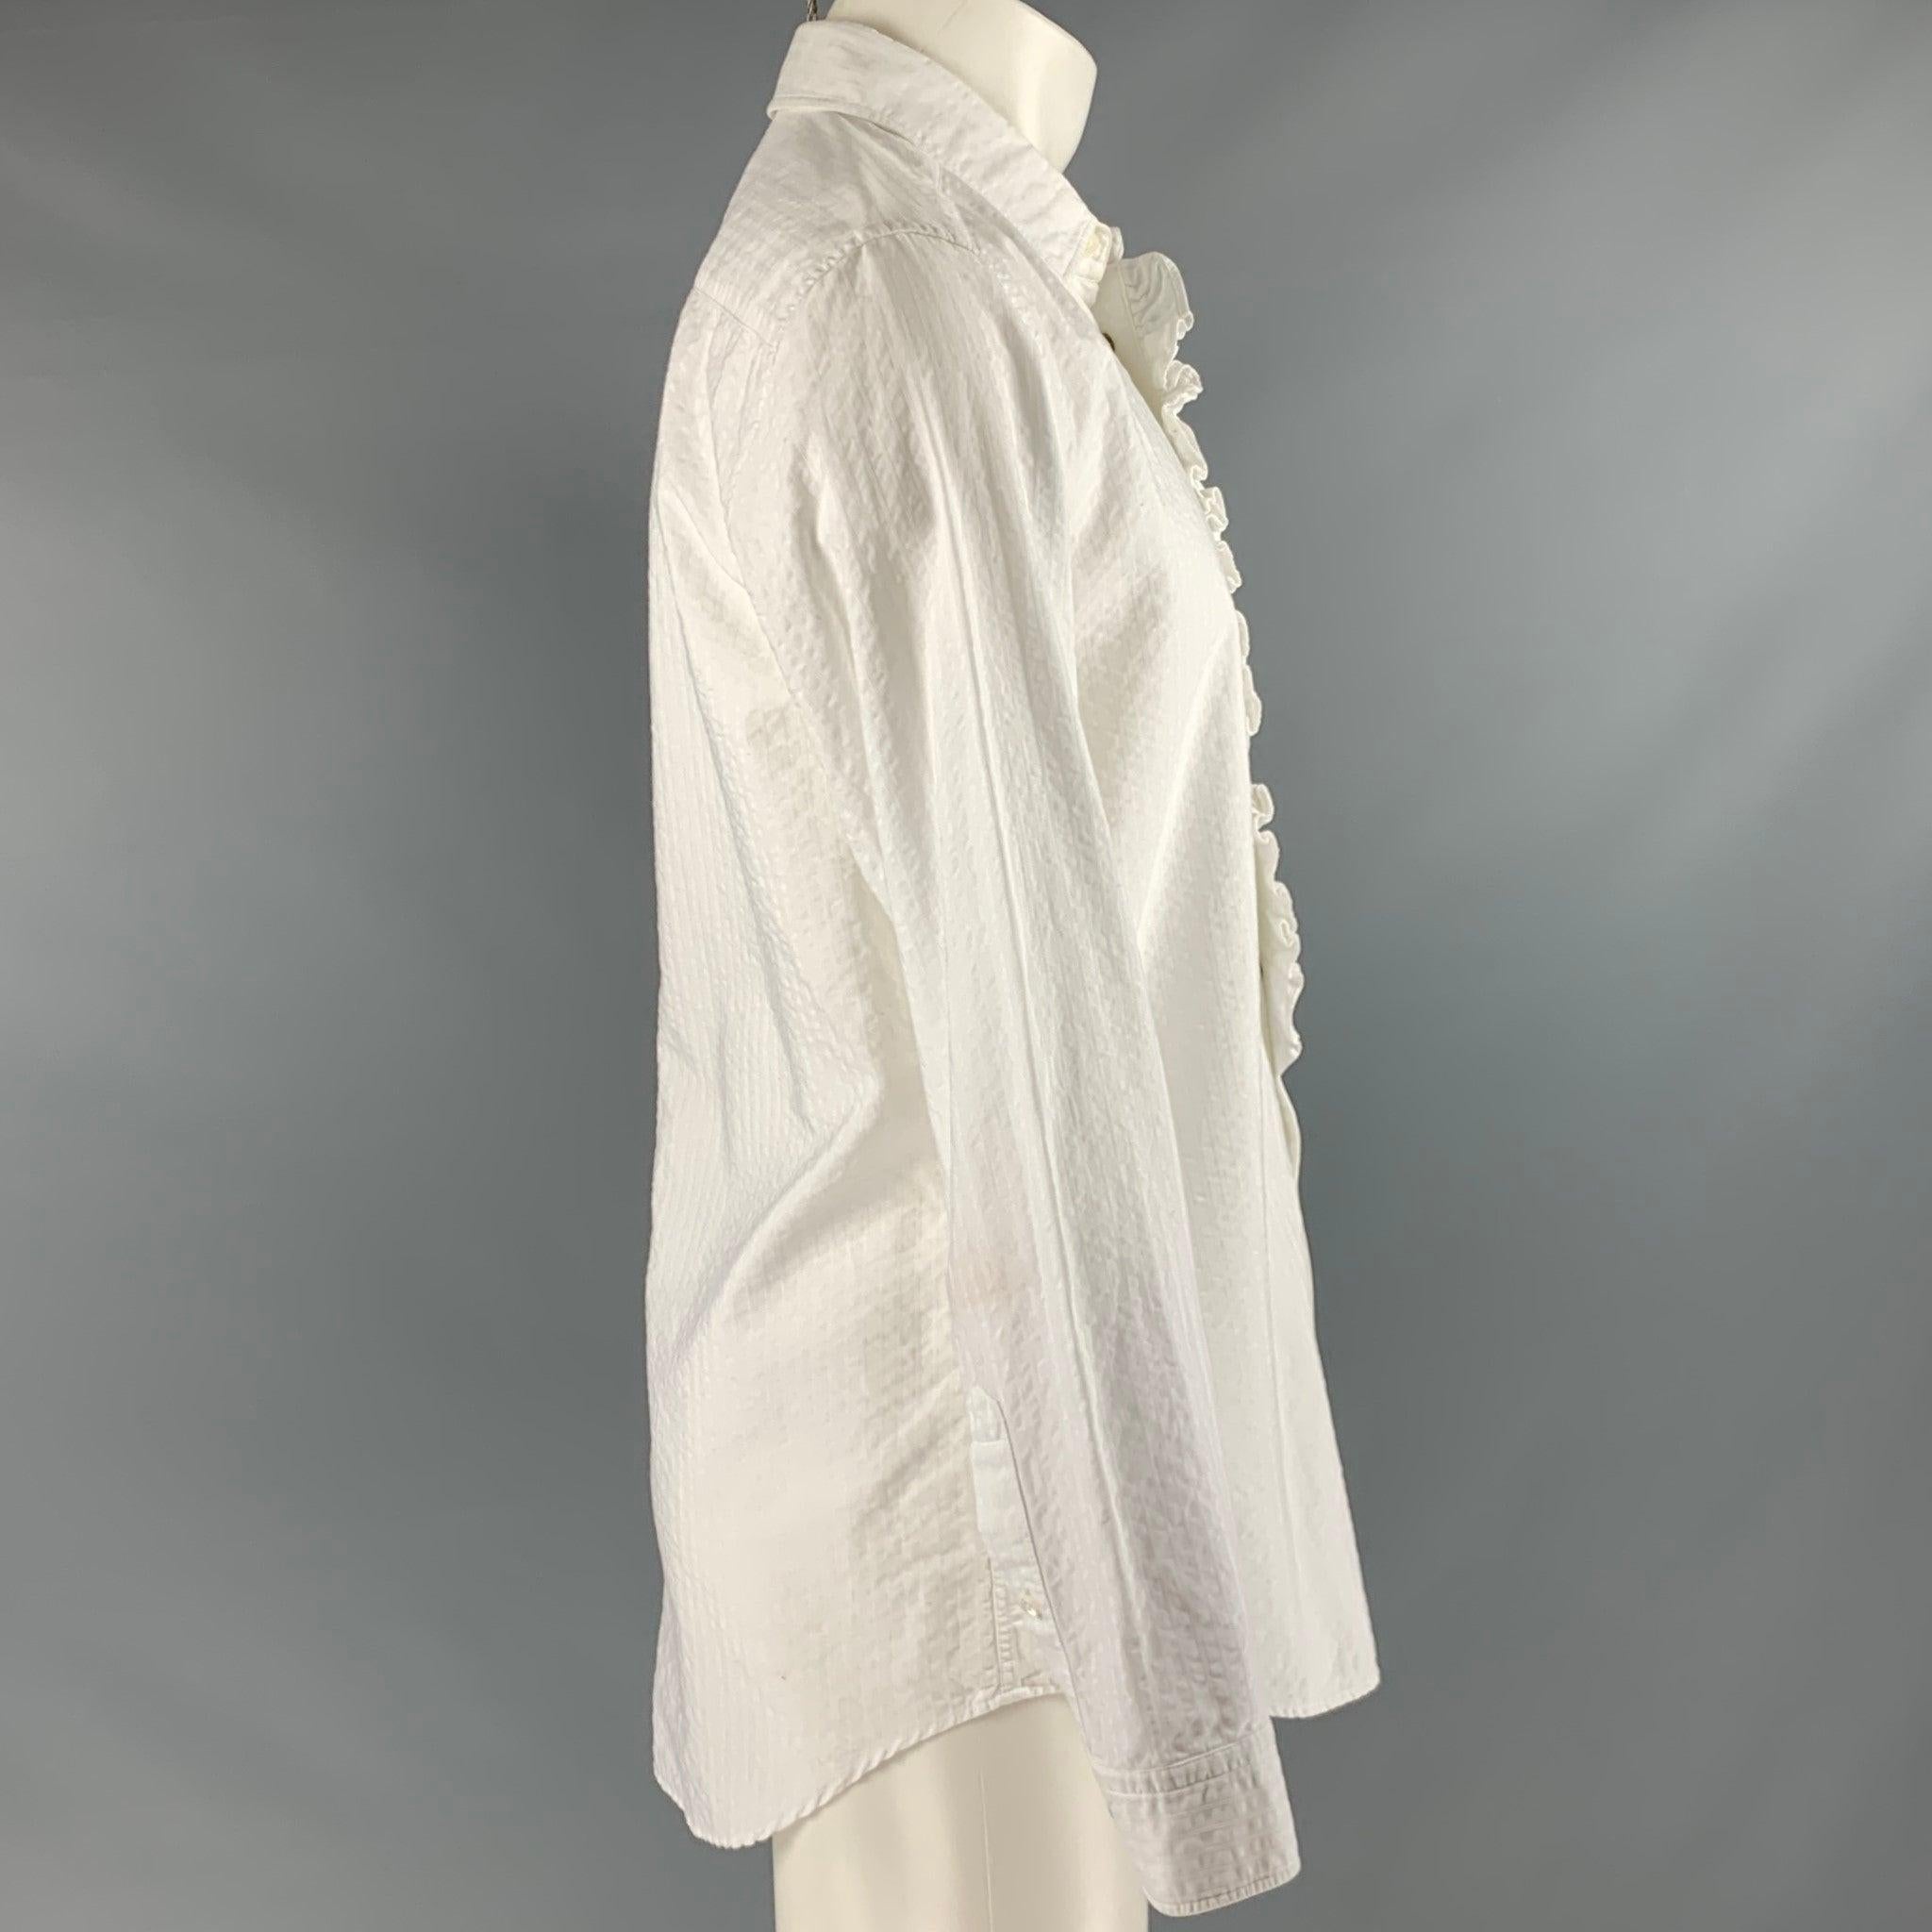 MARC JACOBS long sleeve shirt
in a white cotton fabric featuring seersucker pattern, ruffle front, and snaps closure. Made in Italy.Very Good Pre-Owned Condition. Minor signs of wear. 

Marked:   50 

Measurements: 
 
Shoulder: 17 inches Chest: 40